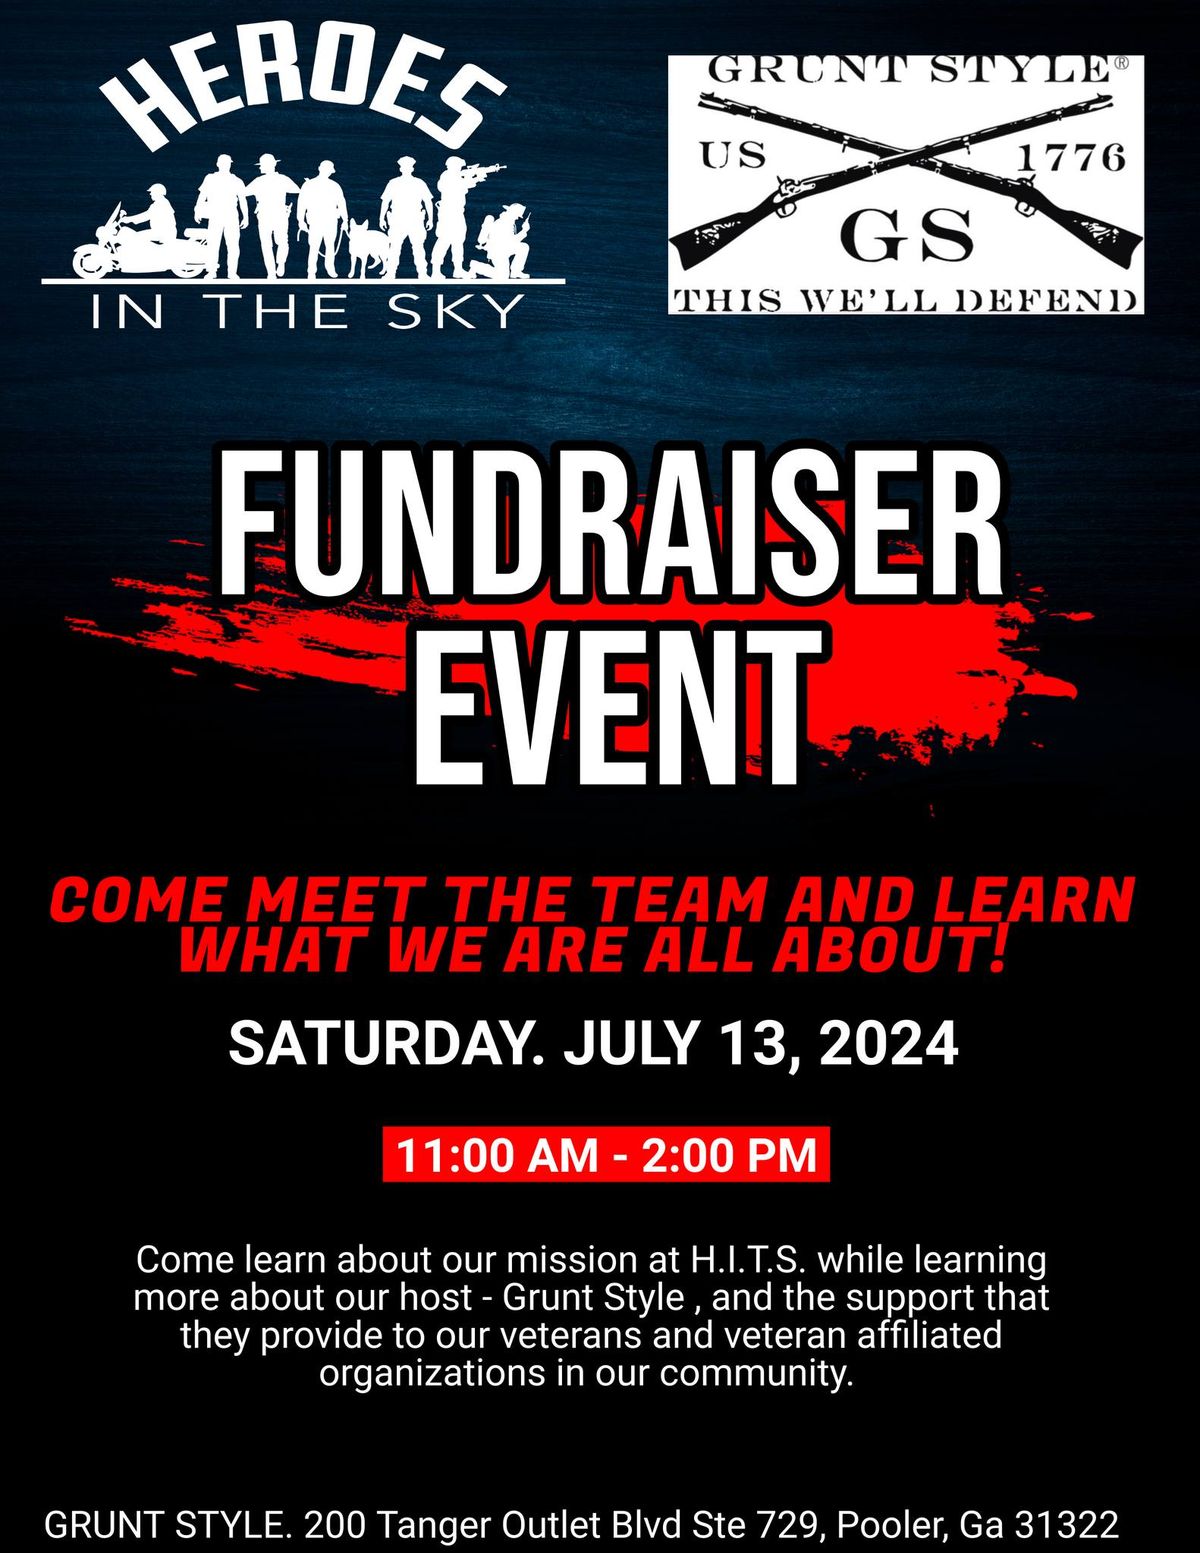 Fundraiser event at Grunt Style